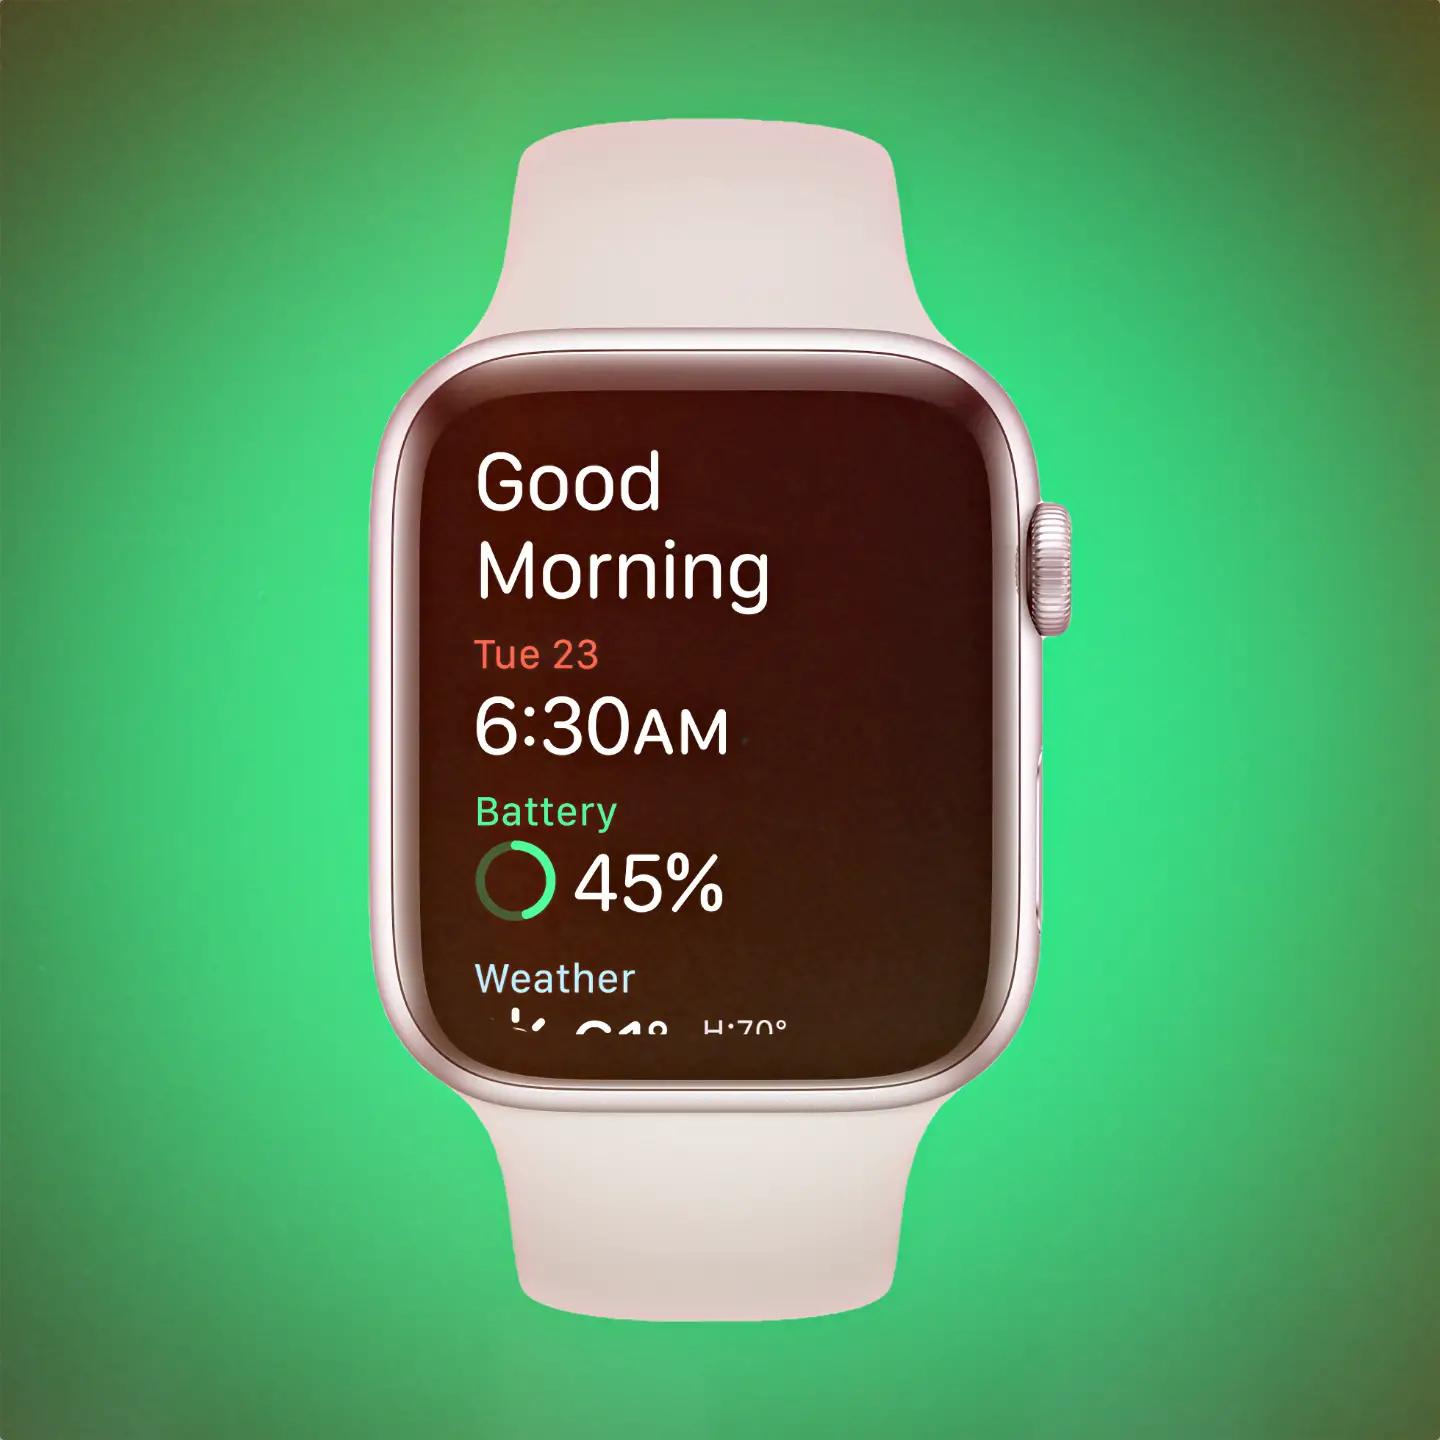 How To Track your sleep with Apple Watch